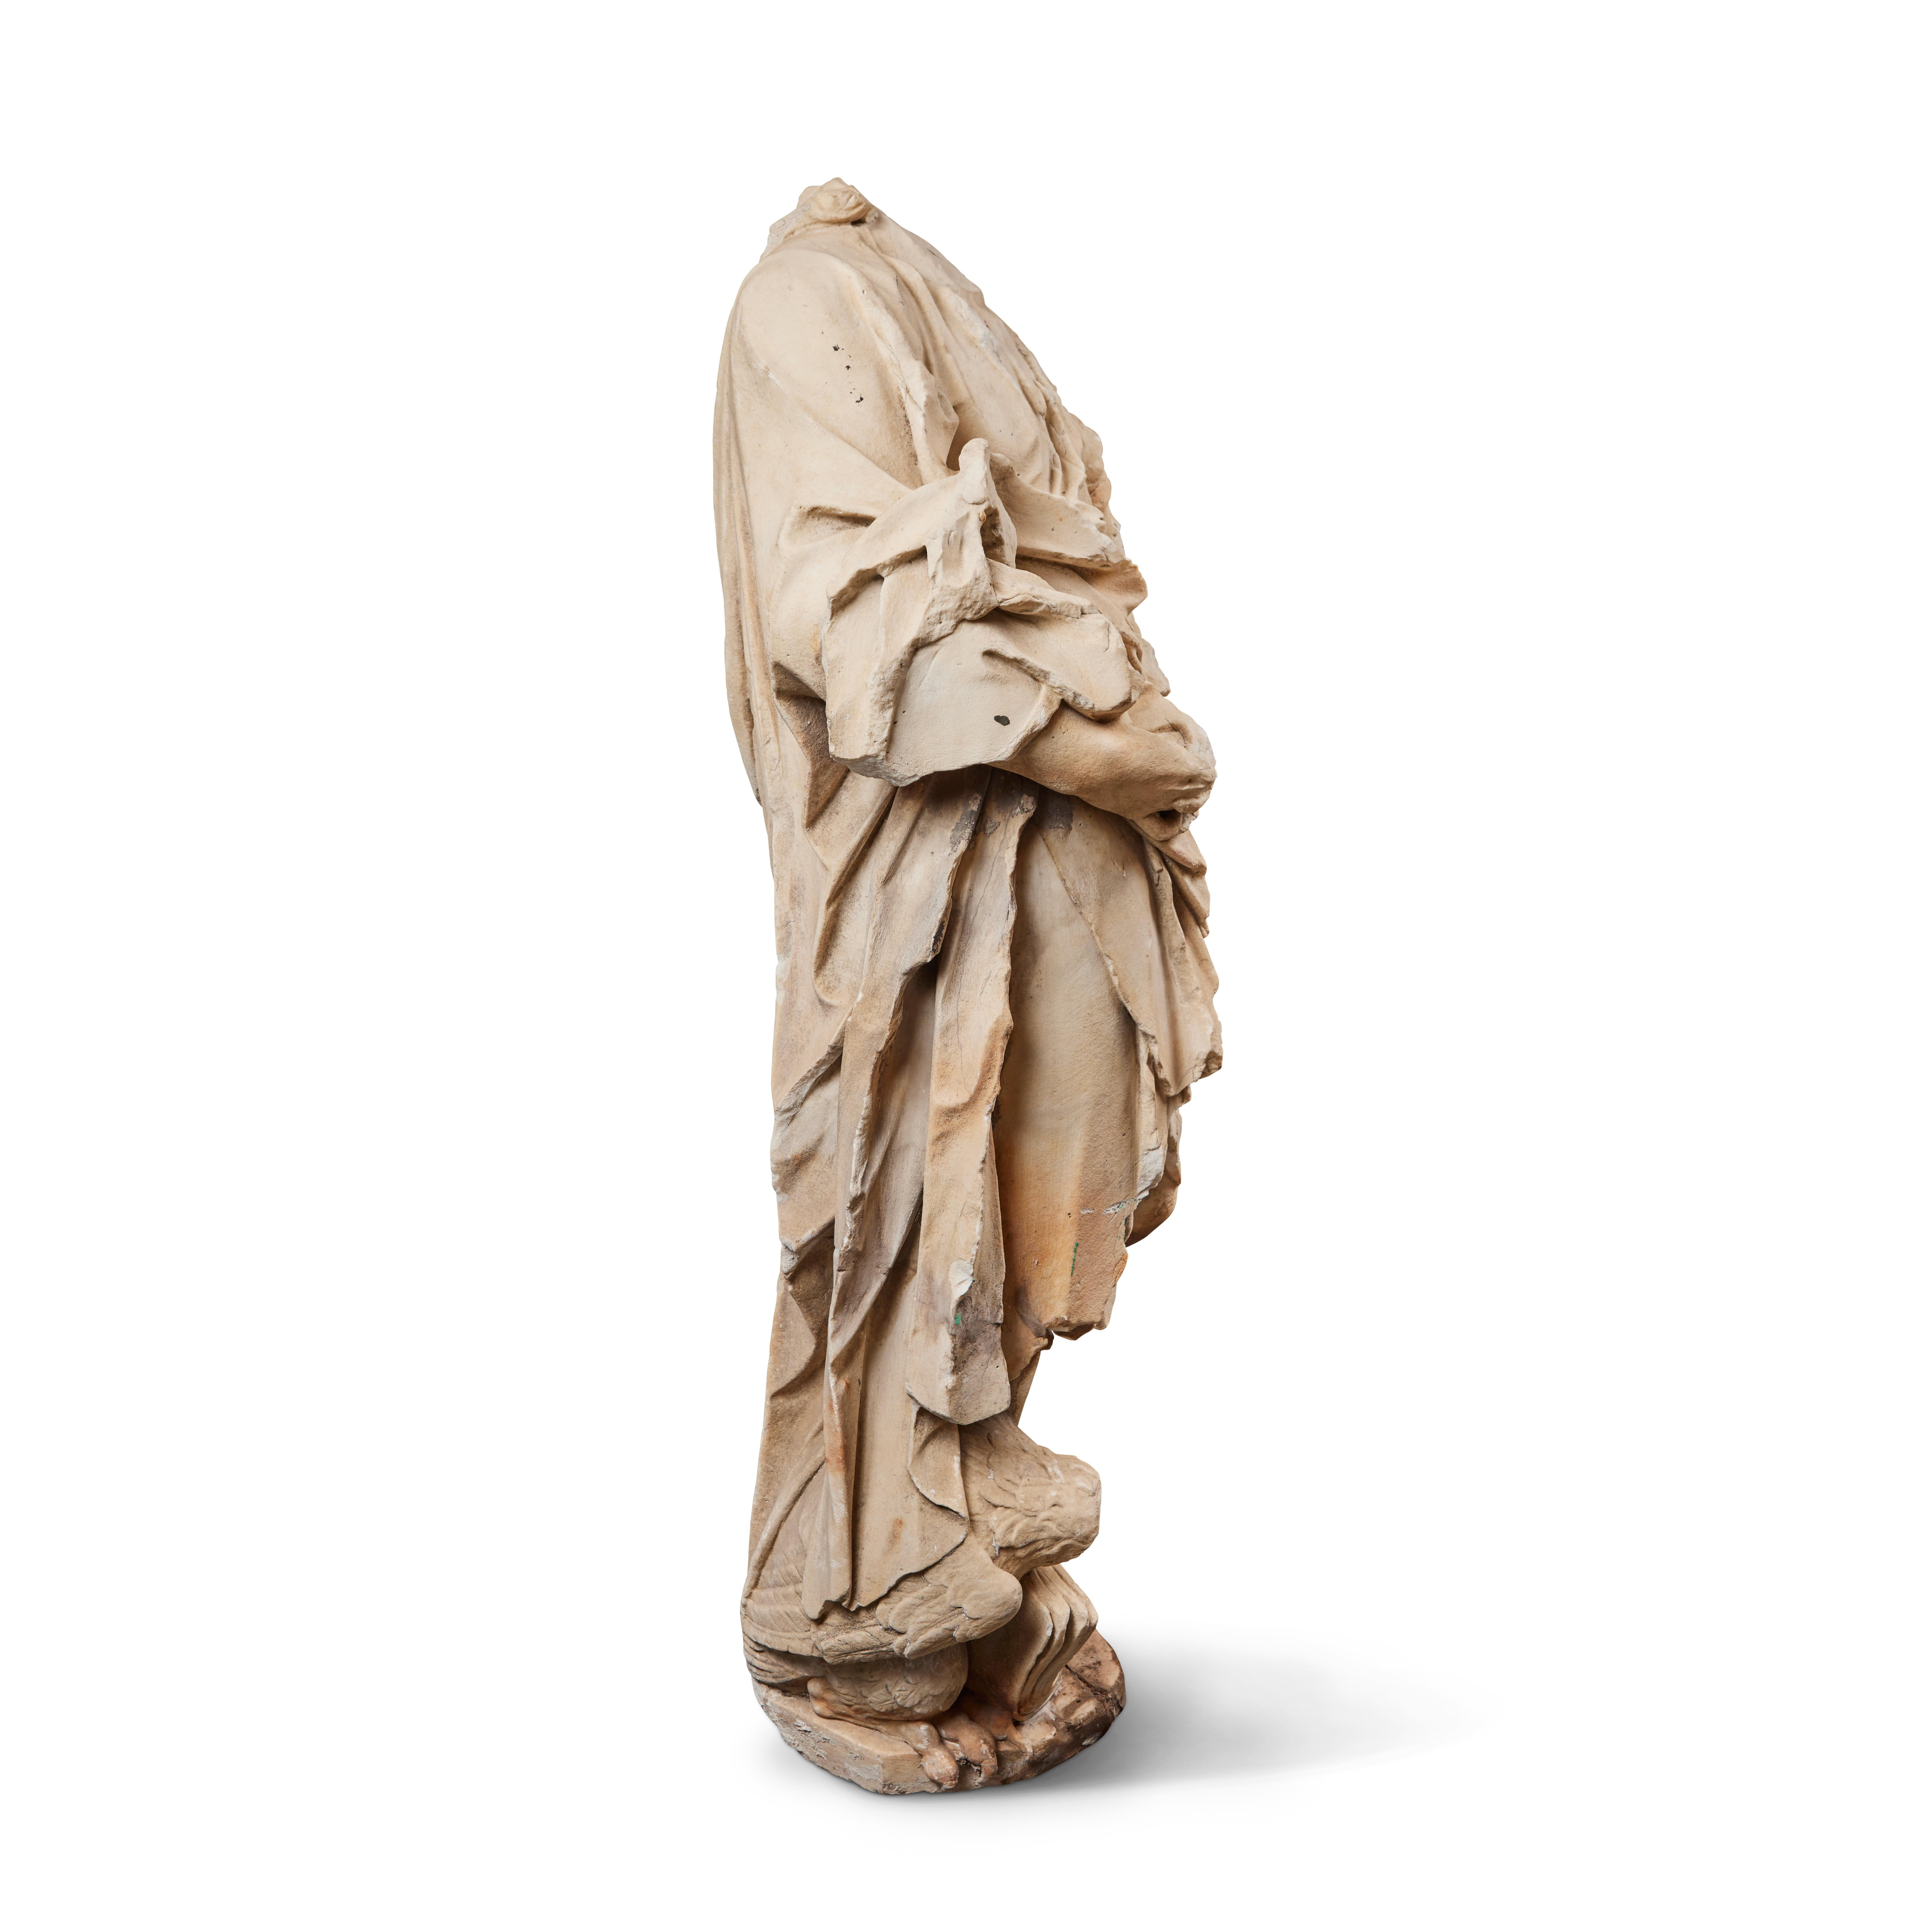 An extraordinary 17th century, hand-carved, solid Carrara marble figure fragment on raised base of the same. The subject is swaddled in a luxurious, gathered robe and tunic and features the remains of long, cascading tendrils of hair. There are